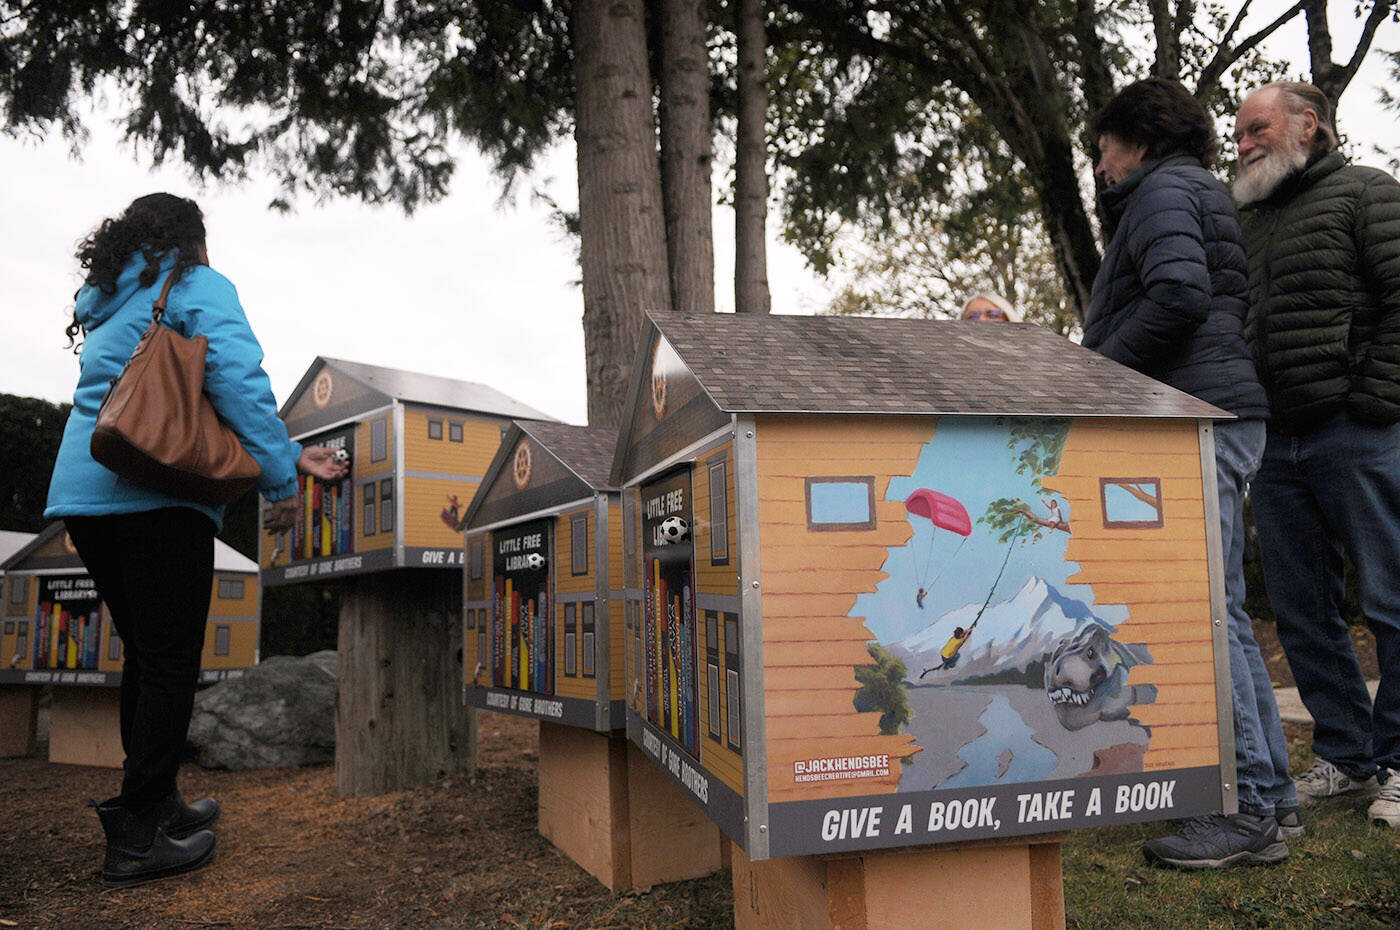 The five book houses with murals on them were unveiled at Fairfield Park in Chilliwack on Thursday, Nov. 10, 2022. (Jenna Hauck/ Chilliwack Progress)